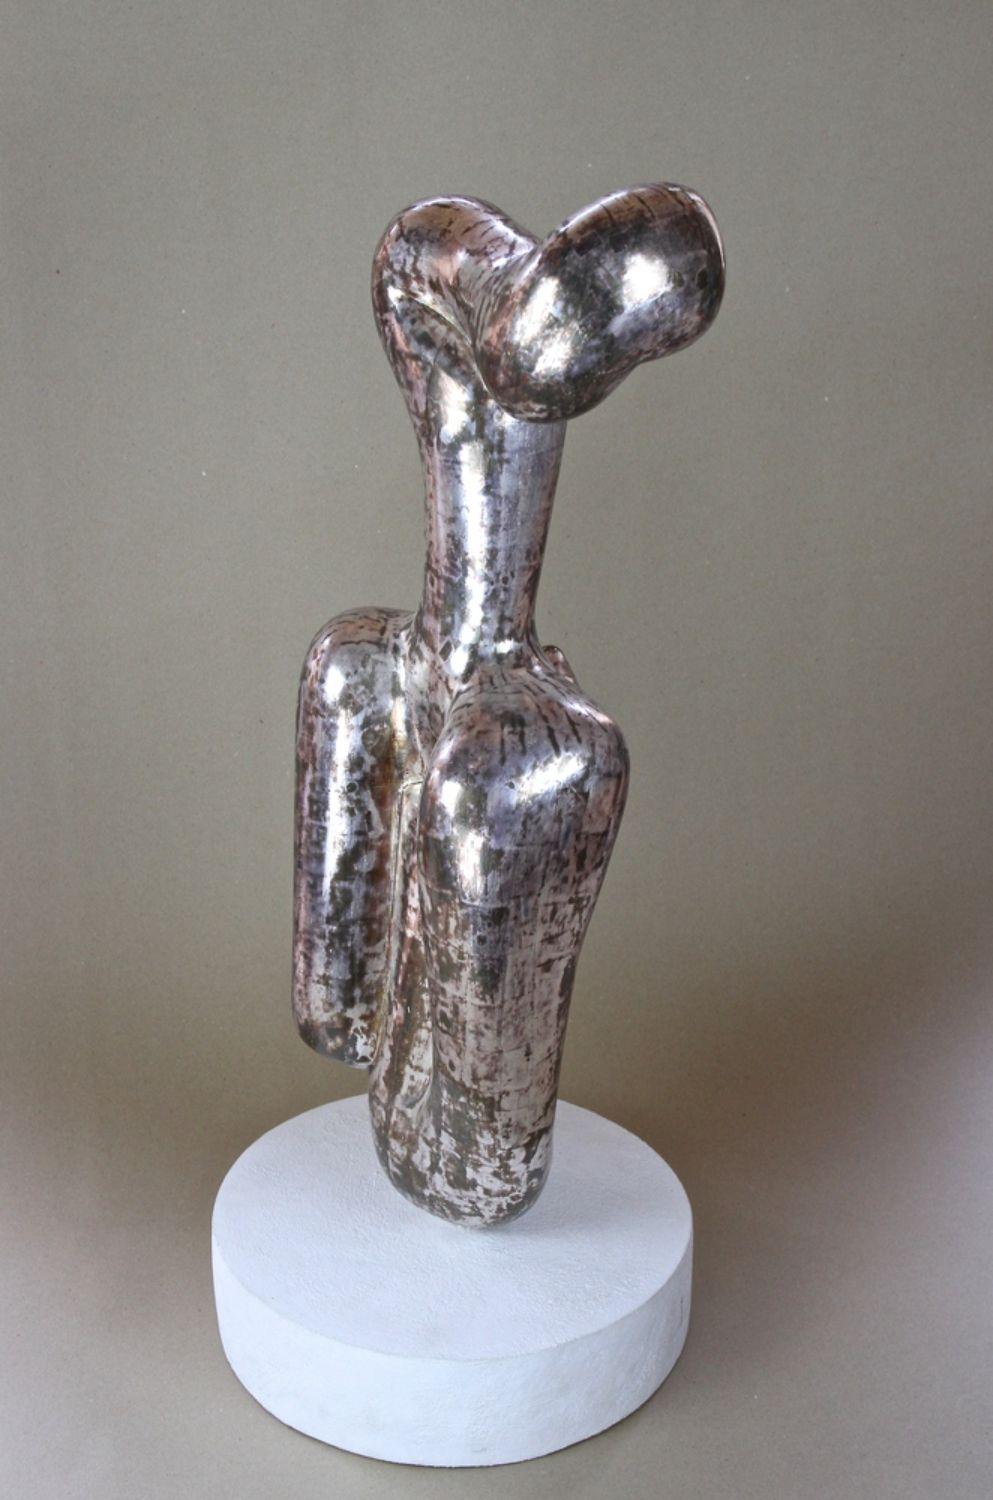 Abstract Contemporary Silvered Sculpture by M. Treml, Handcarved, Austria 2018 For Sale 12